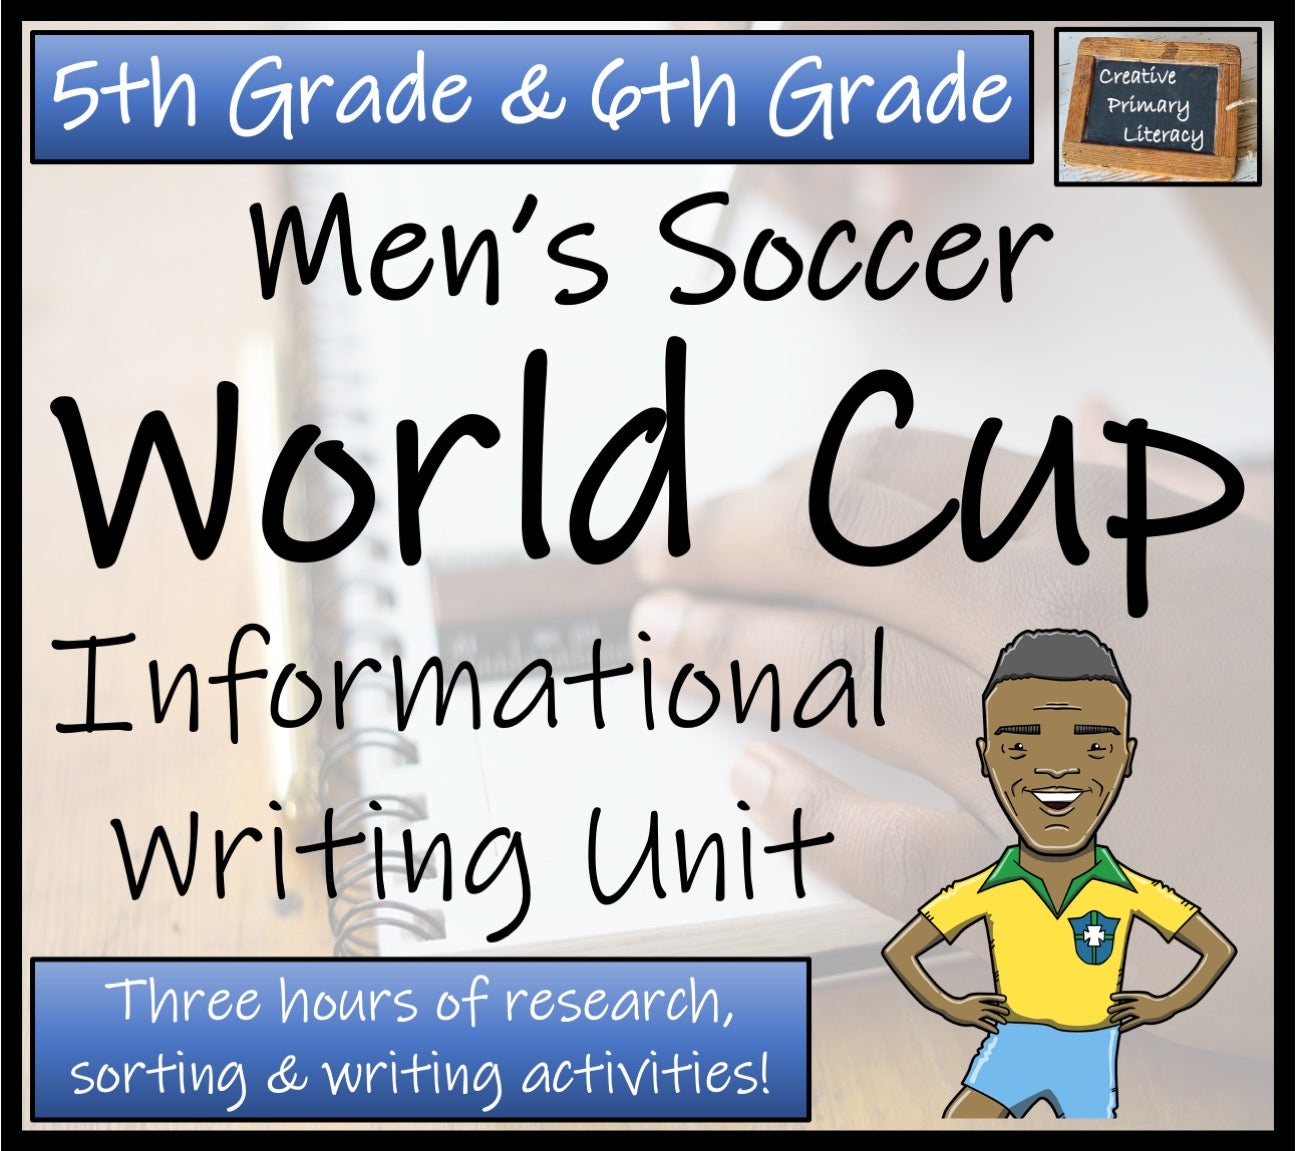 Soccer World Cup Informational Writing Unit | 5th Grade & 6th Grade